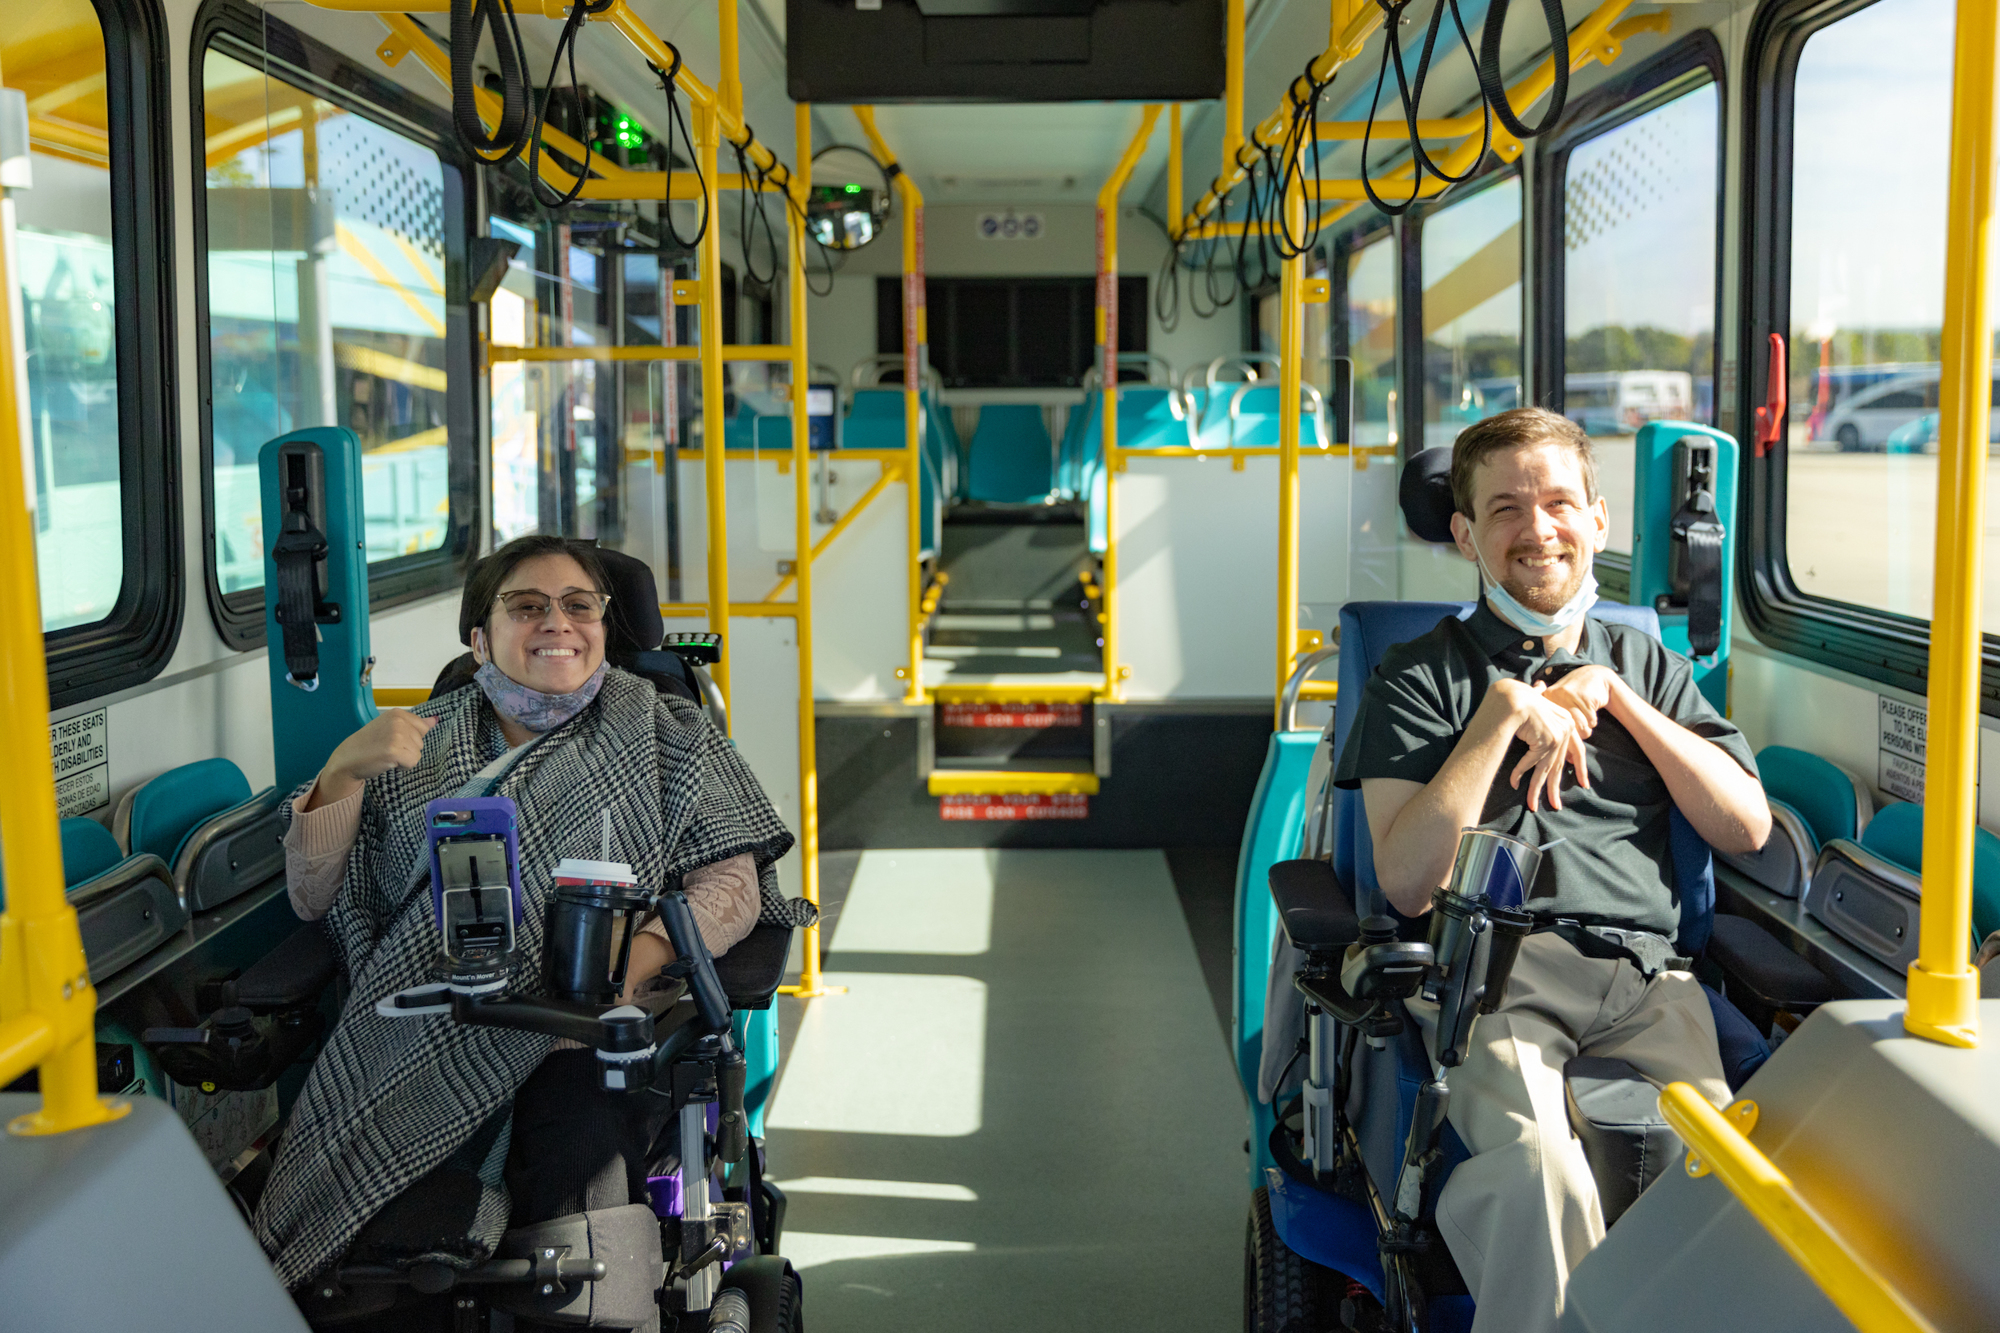 The Pinellas Suncoast Transit Authority expects the SunRunner to provide greater mobility and economic opportunity for disabled residents. (Courtesy photo)